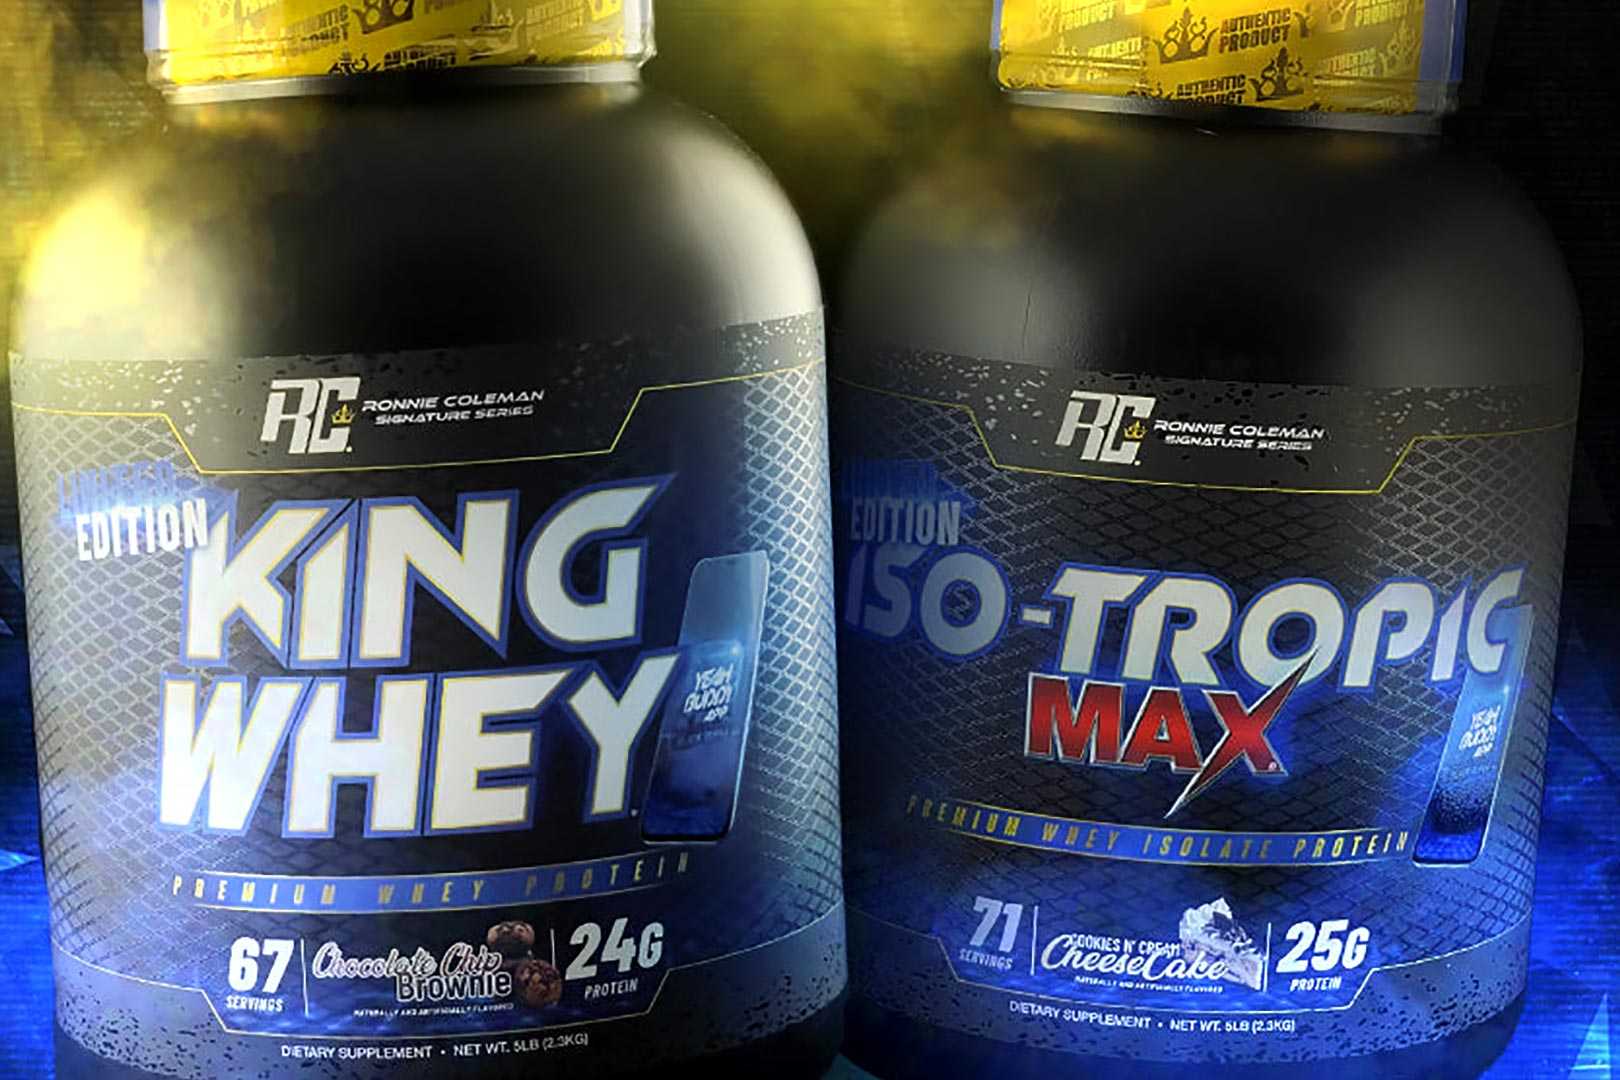 Ronnie Coleman Black Series King Whey And Iso-Tropic